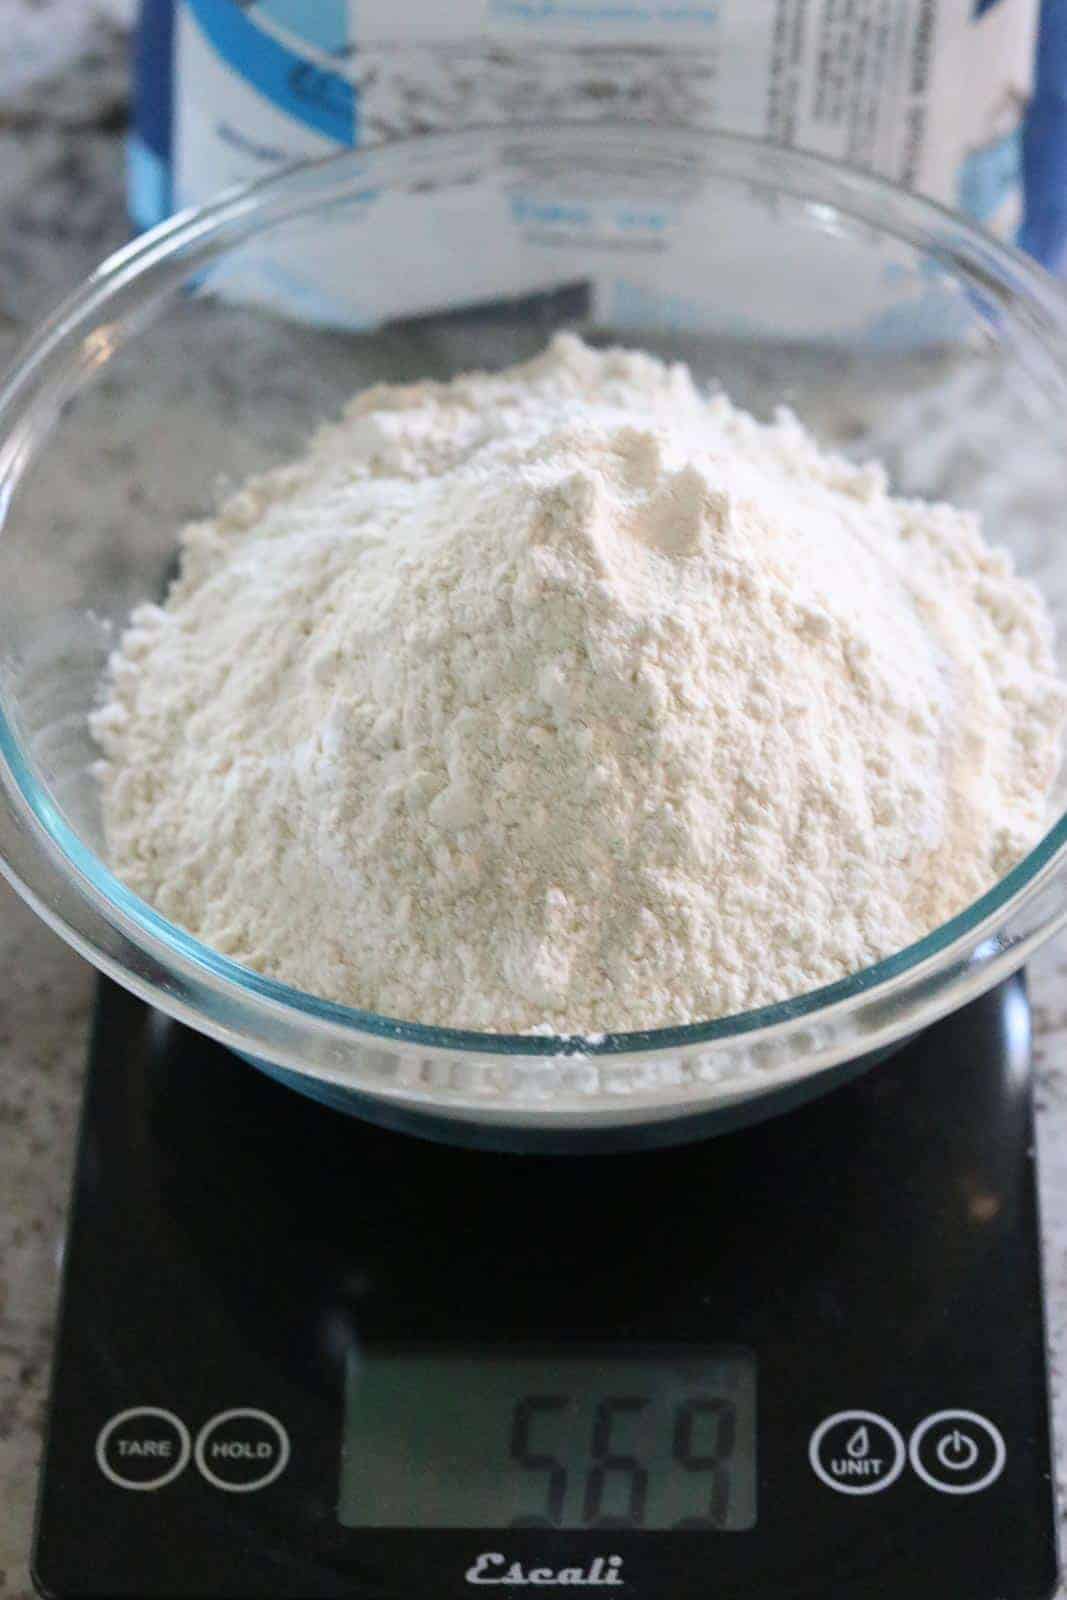 00 Caputo flour in a glass bowl on a scale.